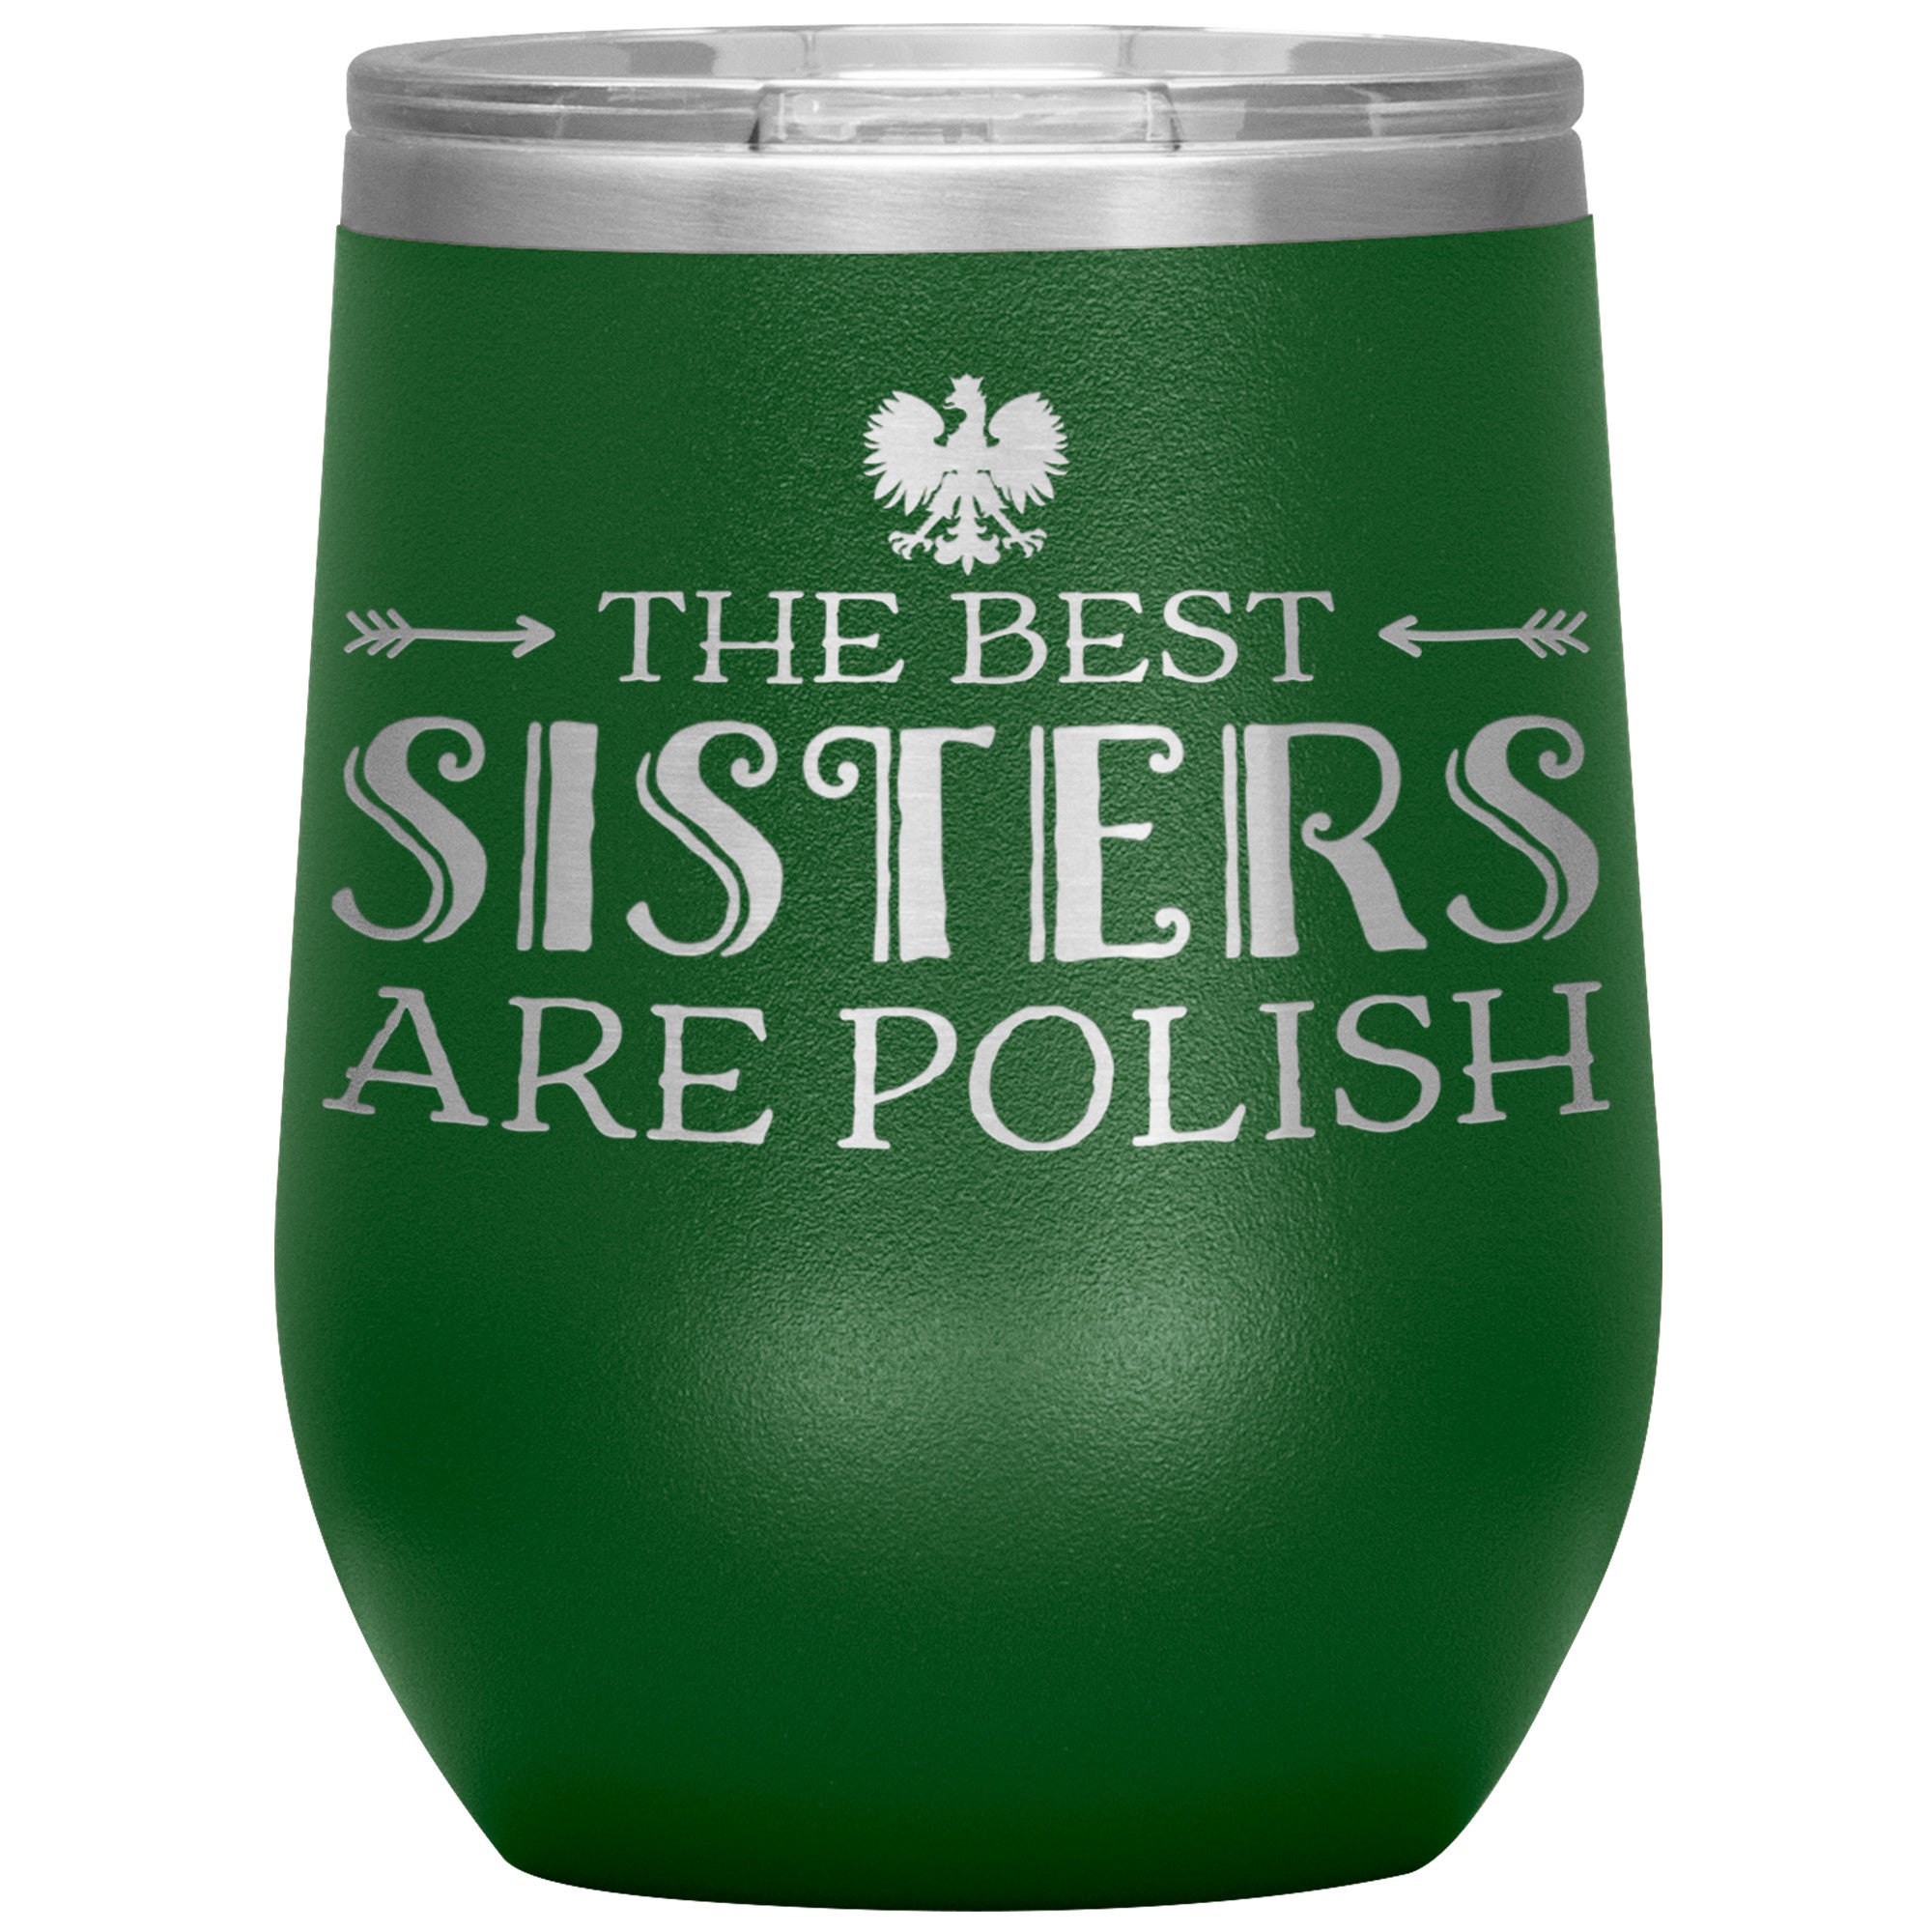 The Best Sisters Are Polish Insulated Wine Tumbler Tumblers teelaunch Green  